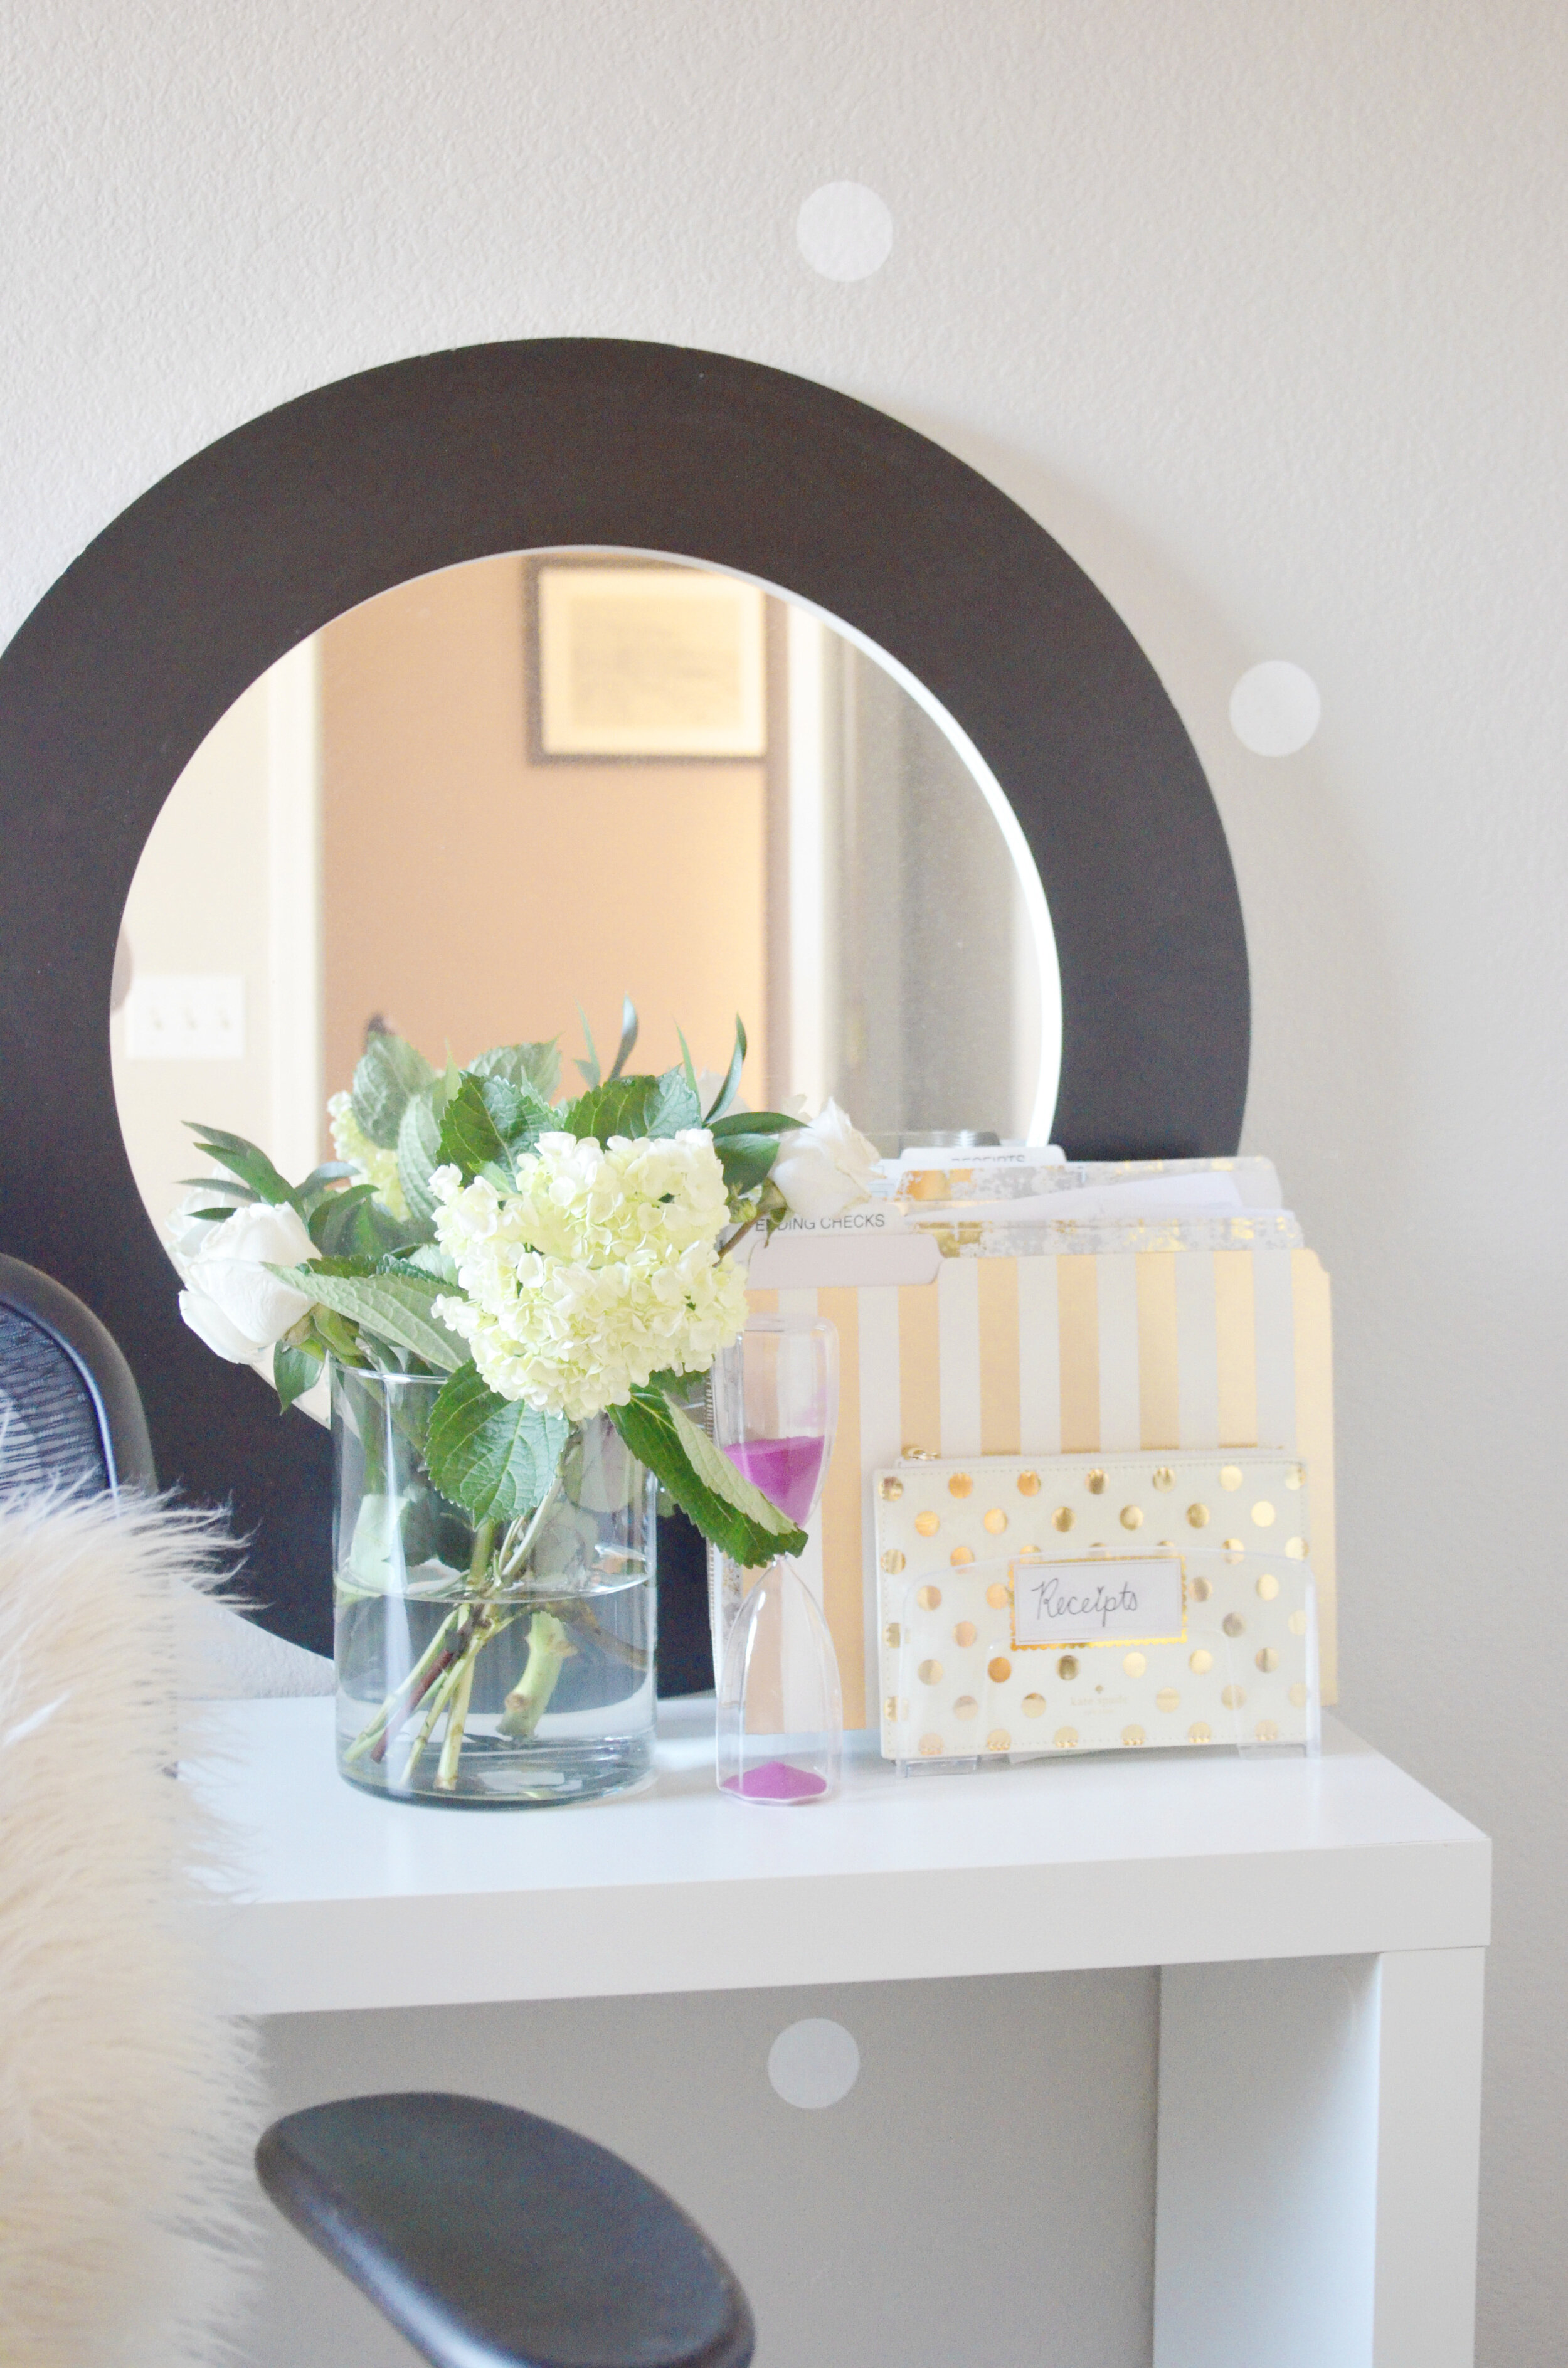 How To Babyproofing Your Home Room By Room - Almost Mom